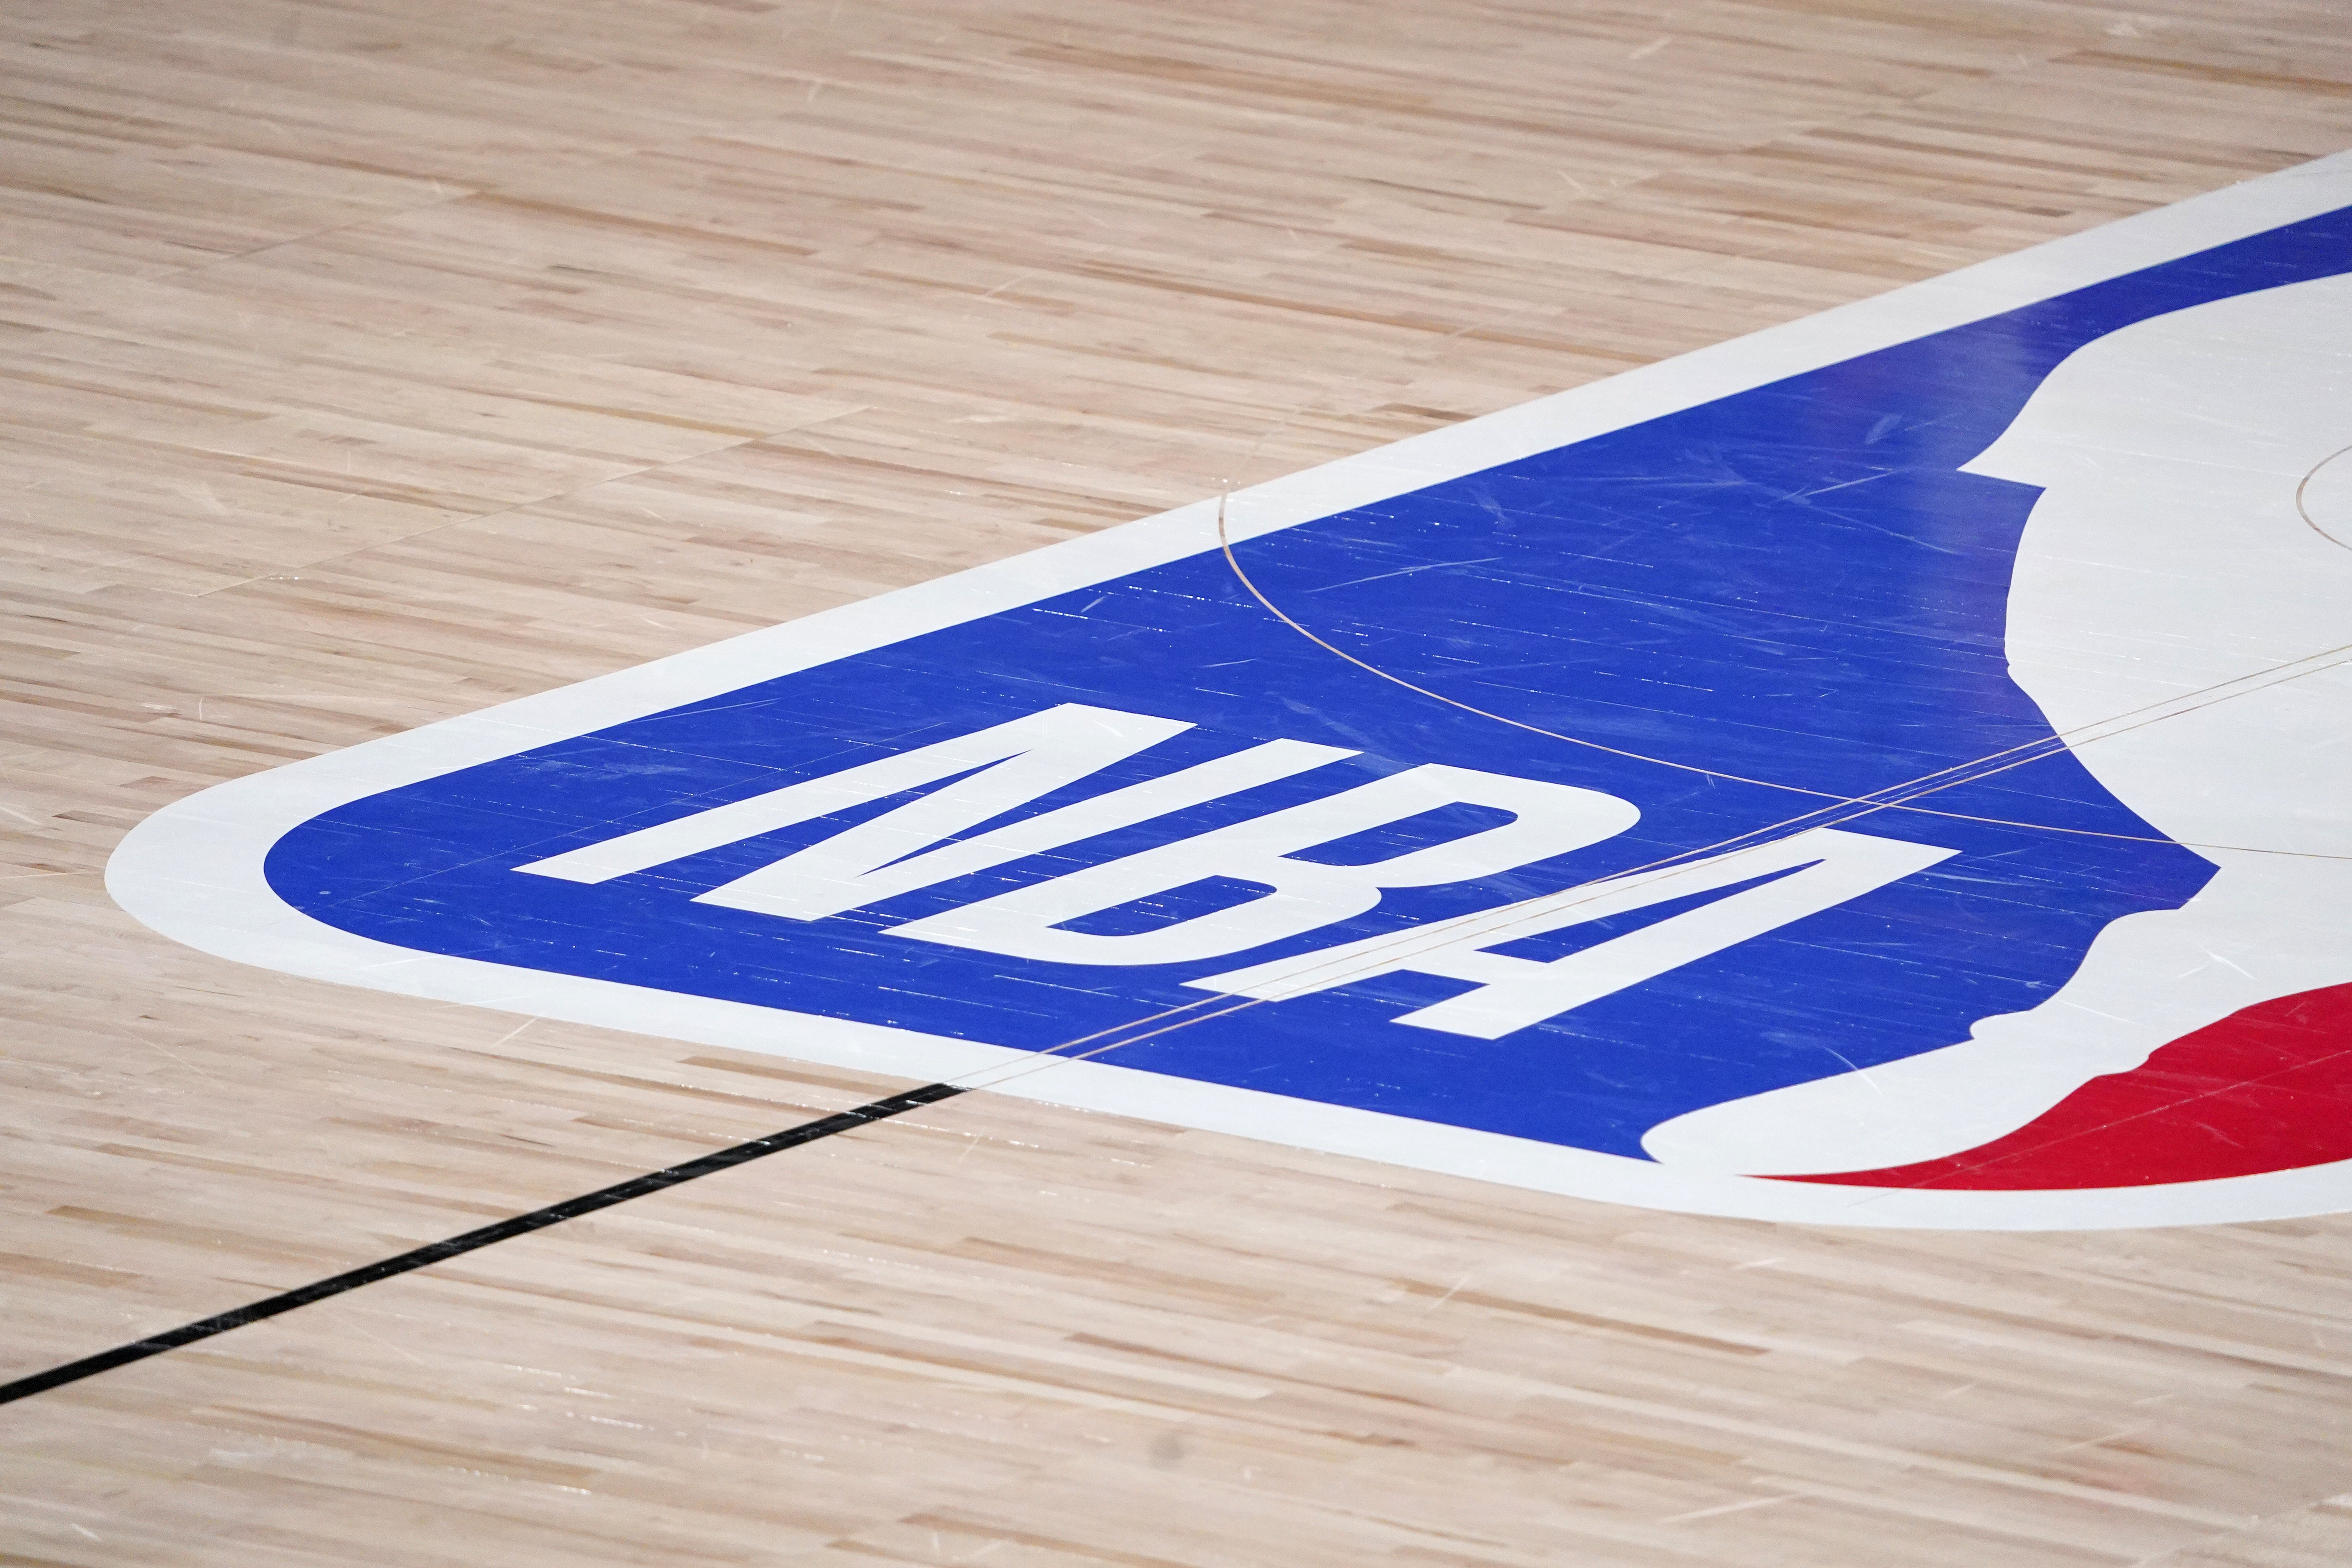 Nba Schedule 2022 2023 Nba Schedule 2022: Regular Season, Playoffs, Finals And Key Dates  Reportedly Revealed | Bleacher Report | Latest News, Videos And Highlights